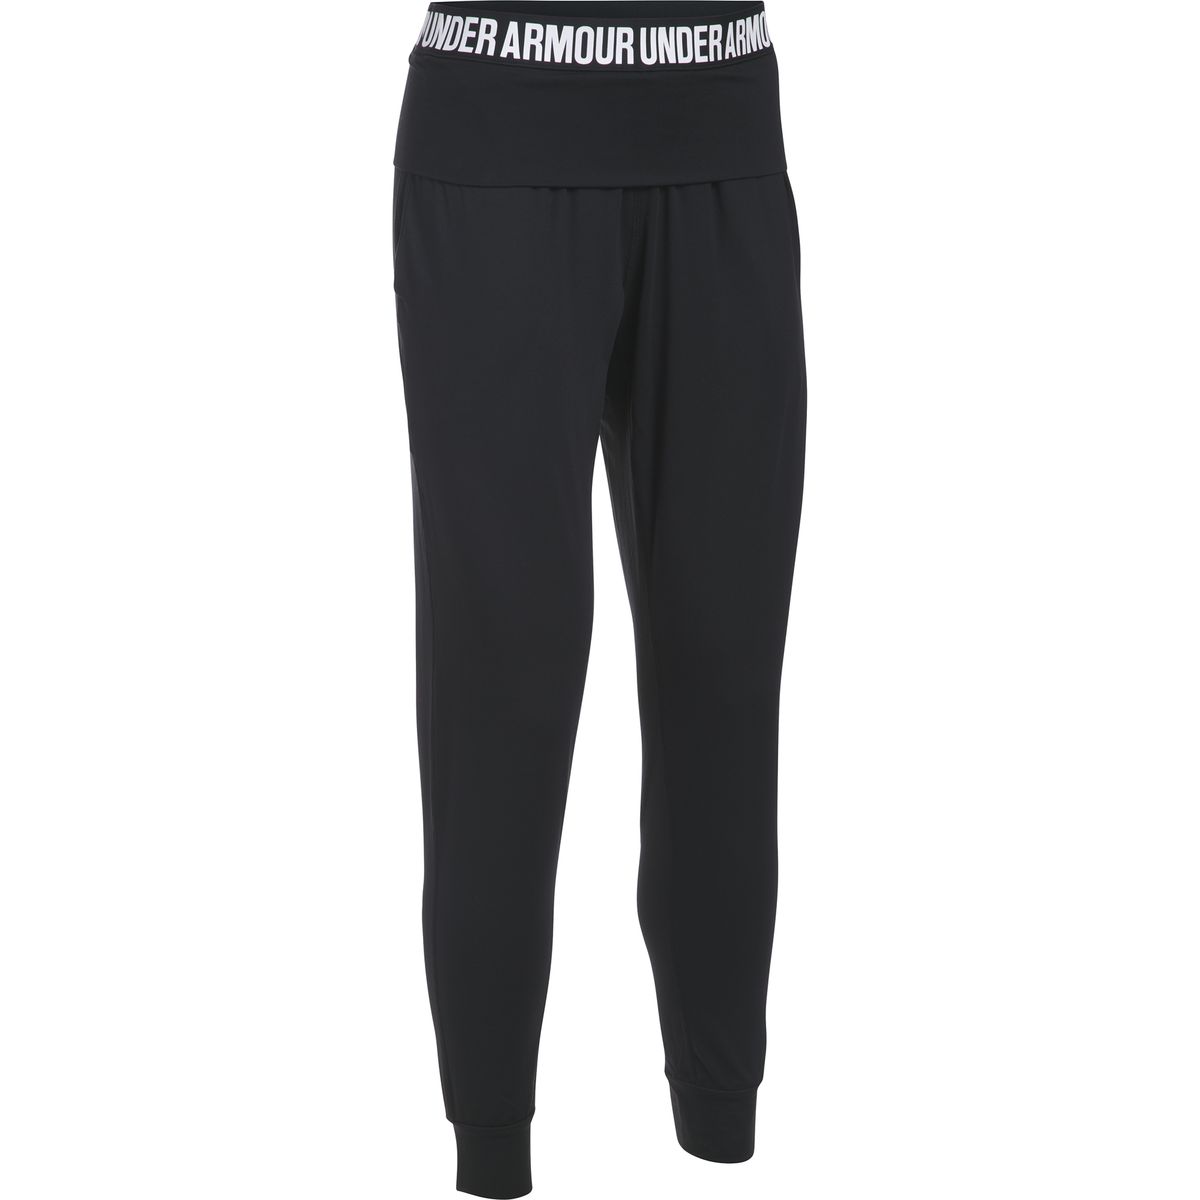 Under Armour Uptown Jogger Pant - Women's - Clothing